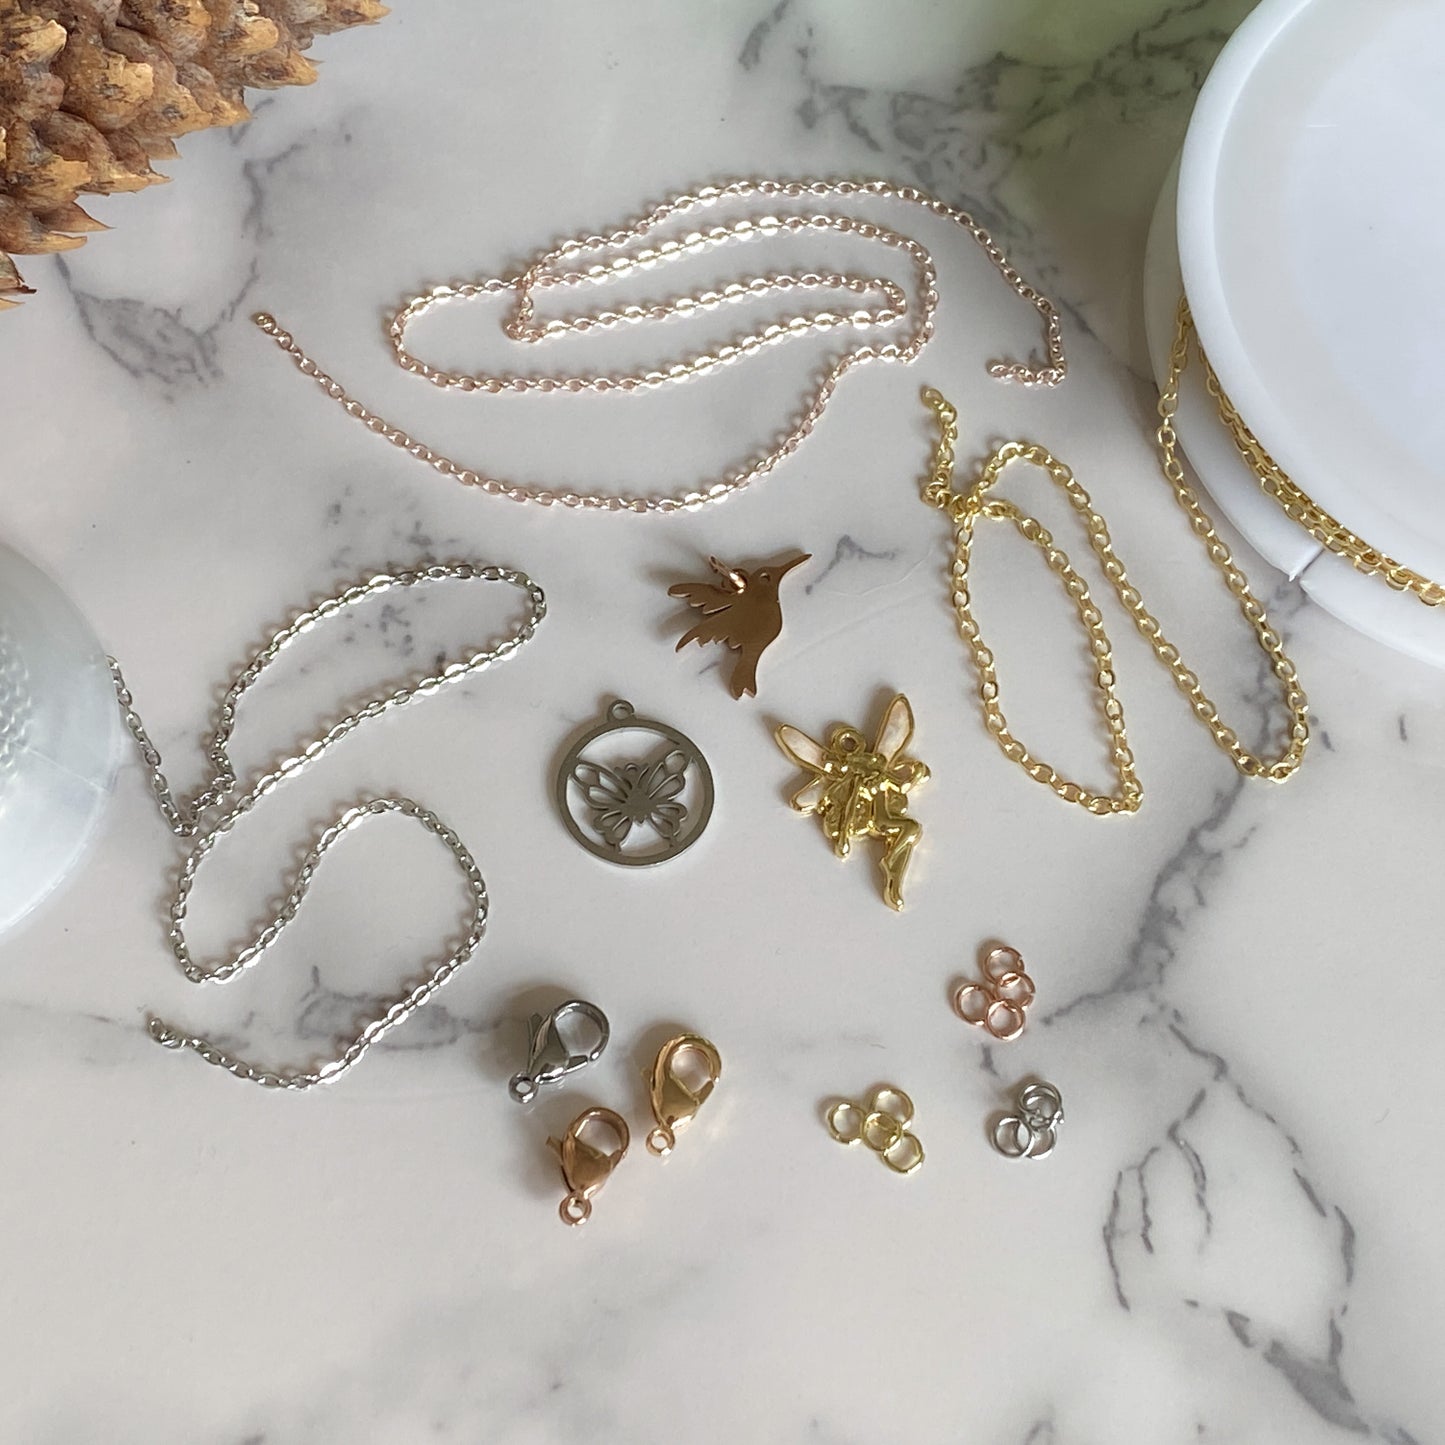 Make-Your-Own Charm Necklace Kit